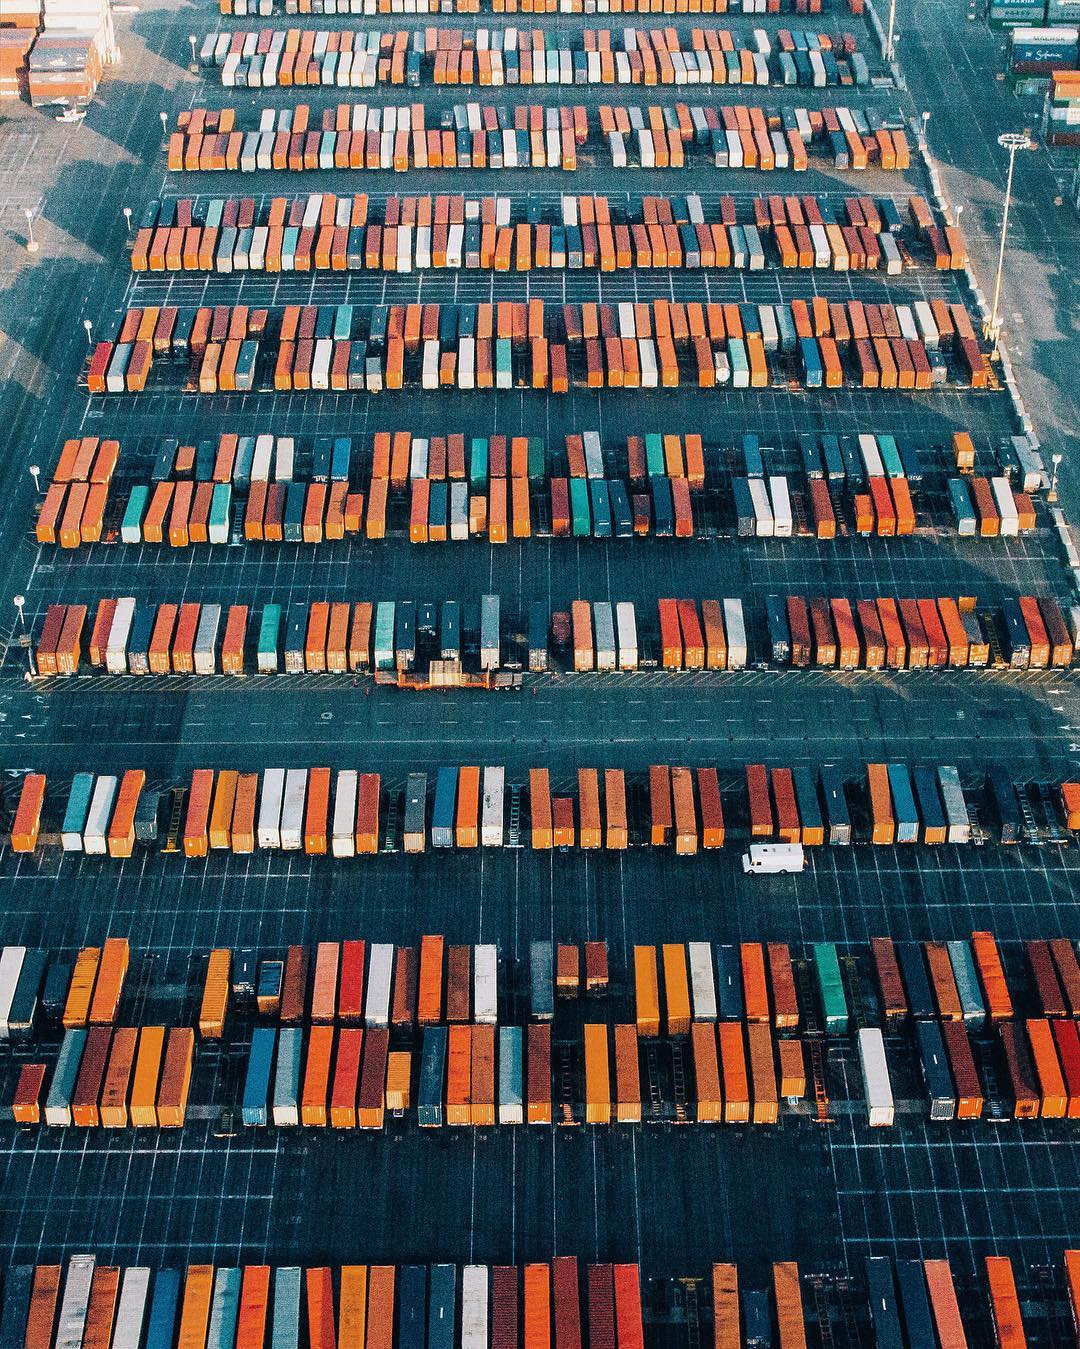 a unique view of a cargo yard - 1 of 8 picks for this week's Friday Favorites